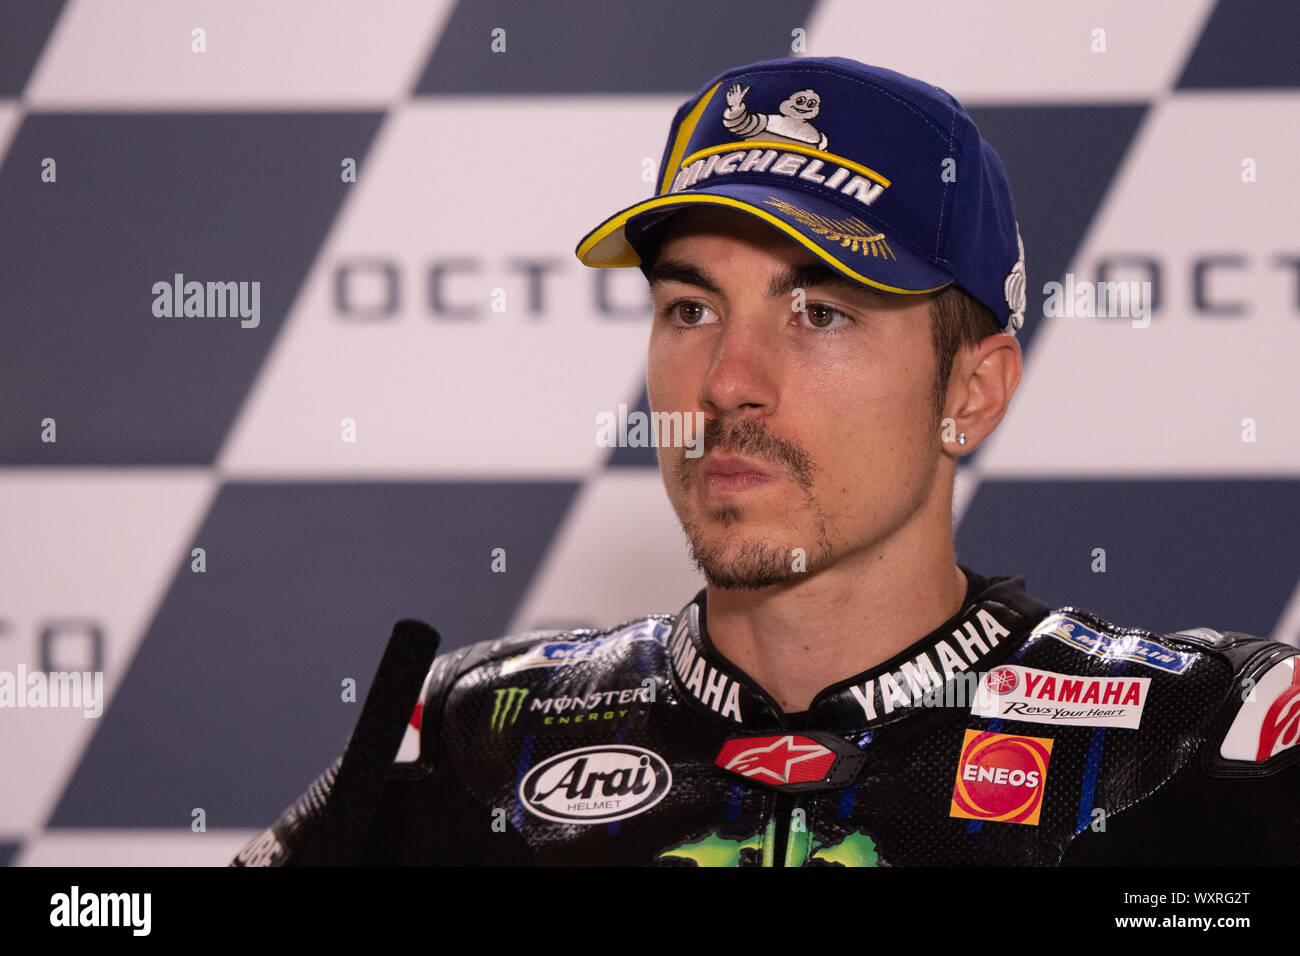 MAVERICK VINALES, SPANISH RIDER NUMBER 12 FOR YAMAHA MONSTER TEAM IN MOTOGP  during Thursday And Sunday Press Conference Of The Motogp Of San Marino A Stock Photo